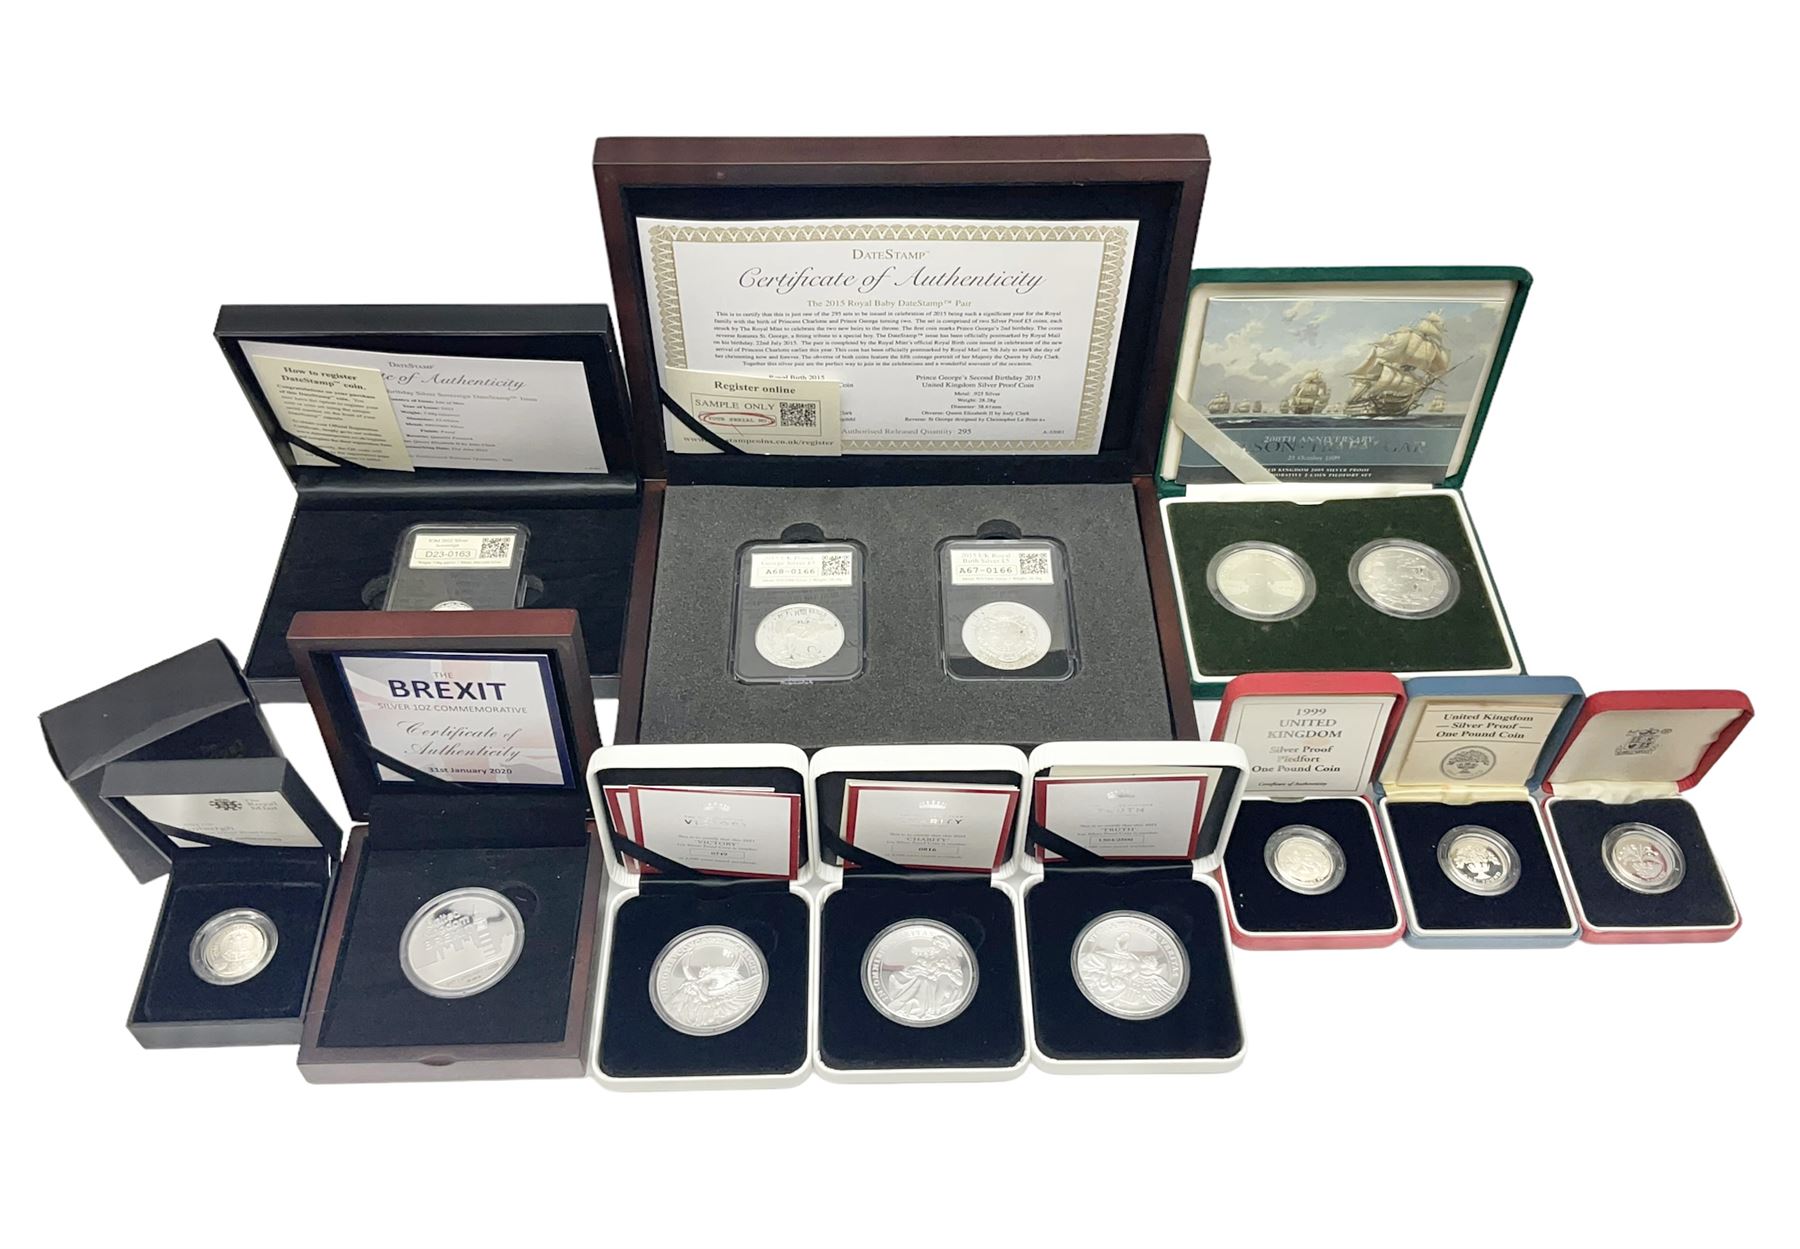 Commemorative coins and medallions including The Royal Mint United Kingdom 2005 '200th Anniversary T